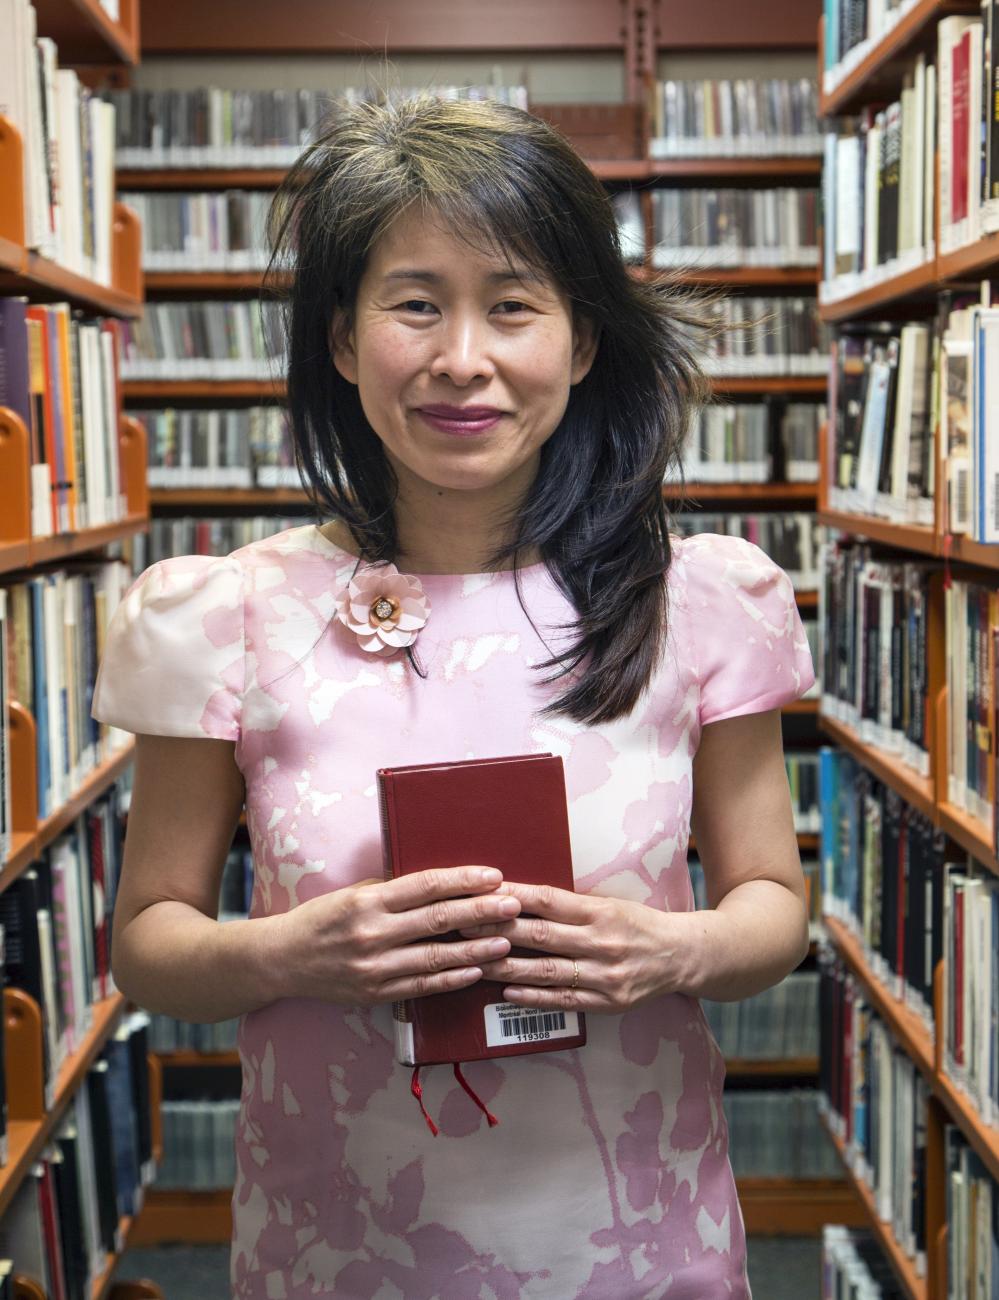 Kim Thúy Ly Thanh dressed in pink holding a book and surrounded by shelves of books.